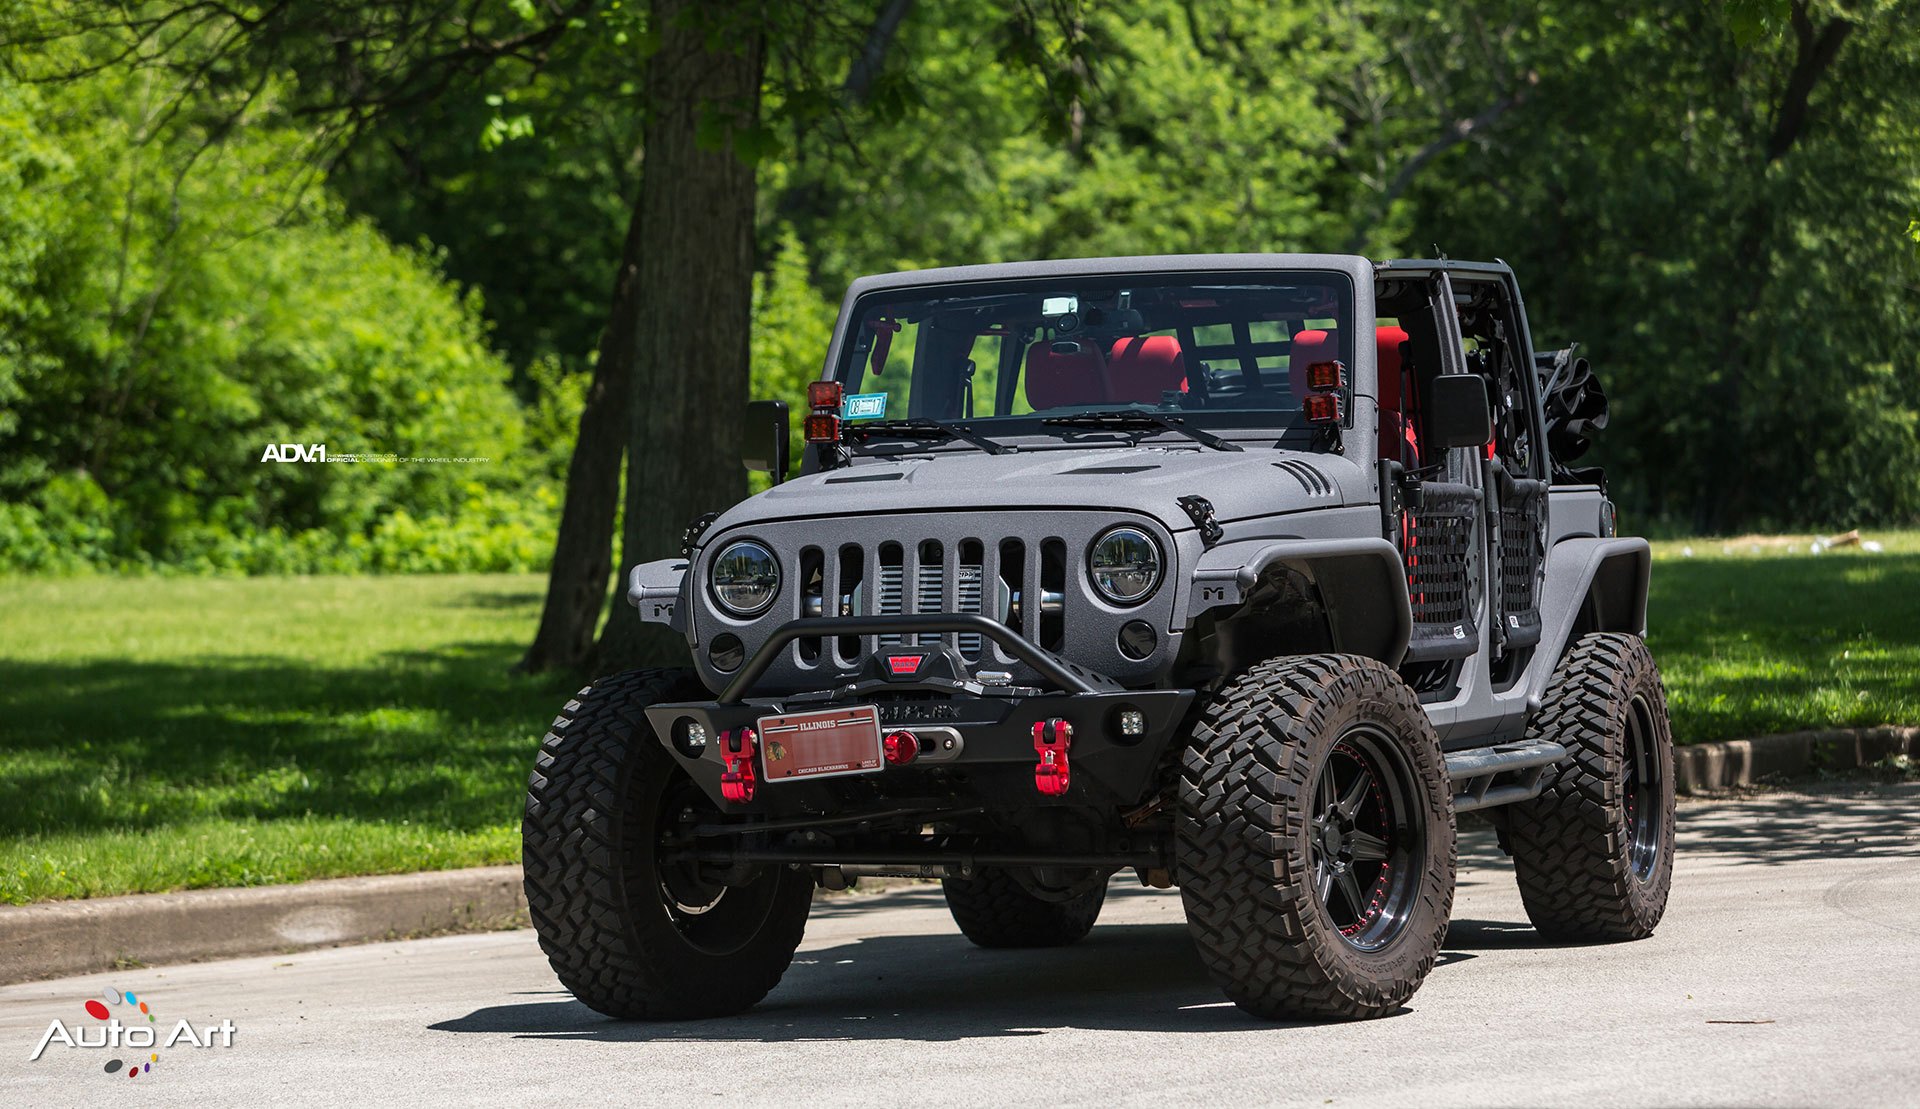 Gray Jeep Wrangler with Warn Off-Road Winch Front Bumper - Photo by ADV.1